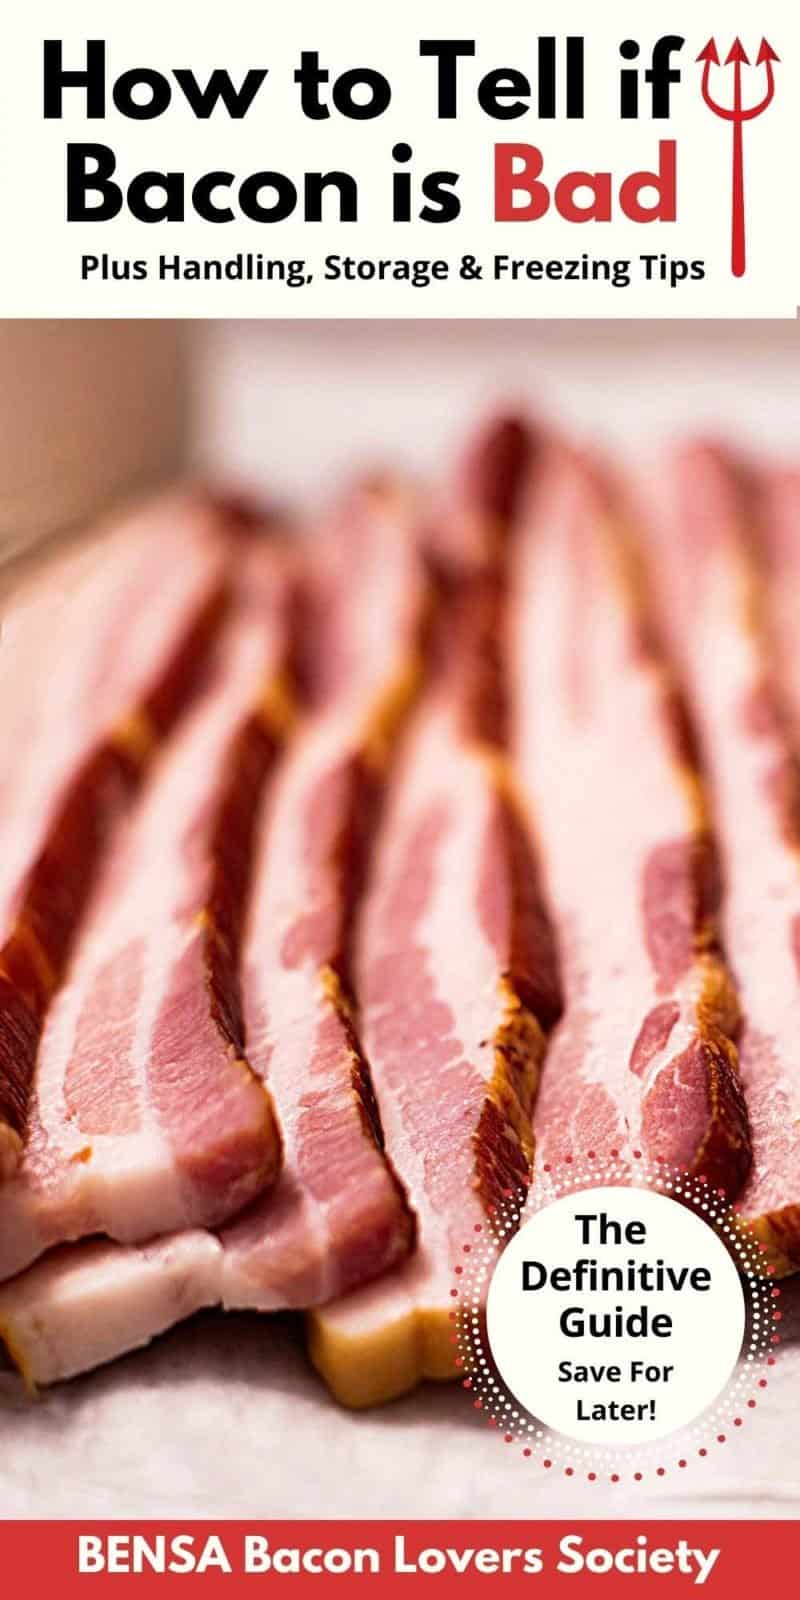 Six slices of raw thick cut bacon.